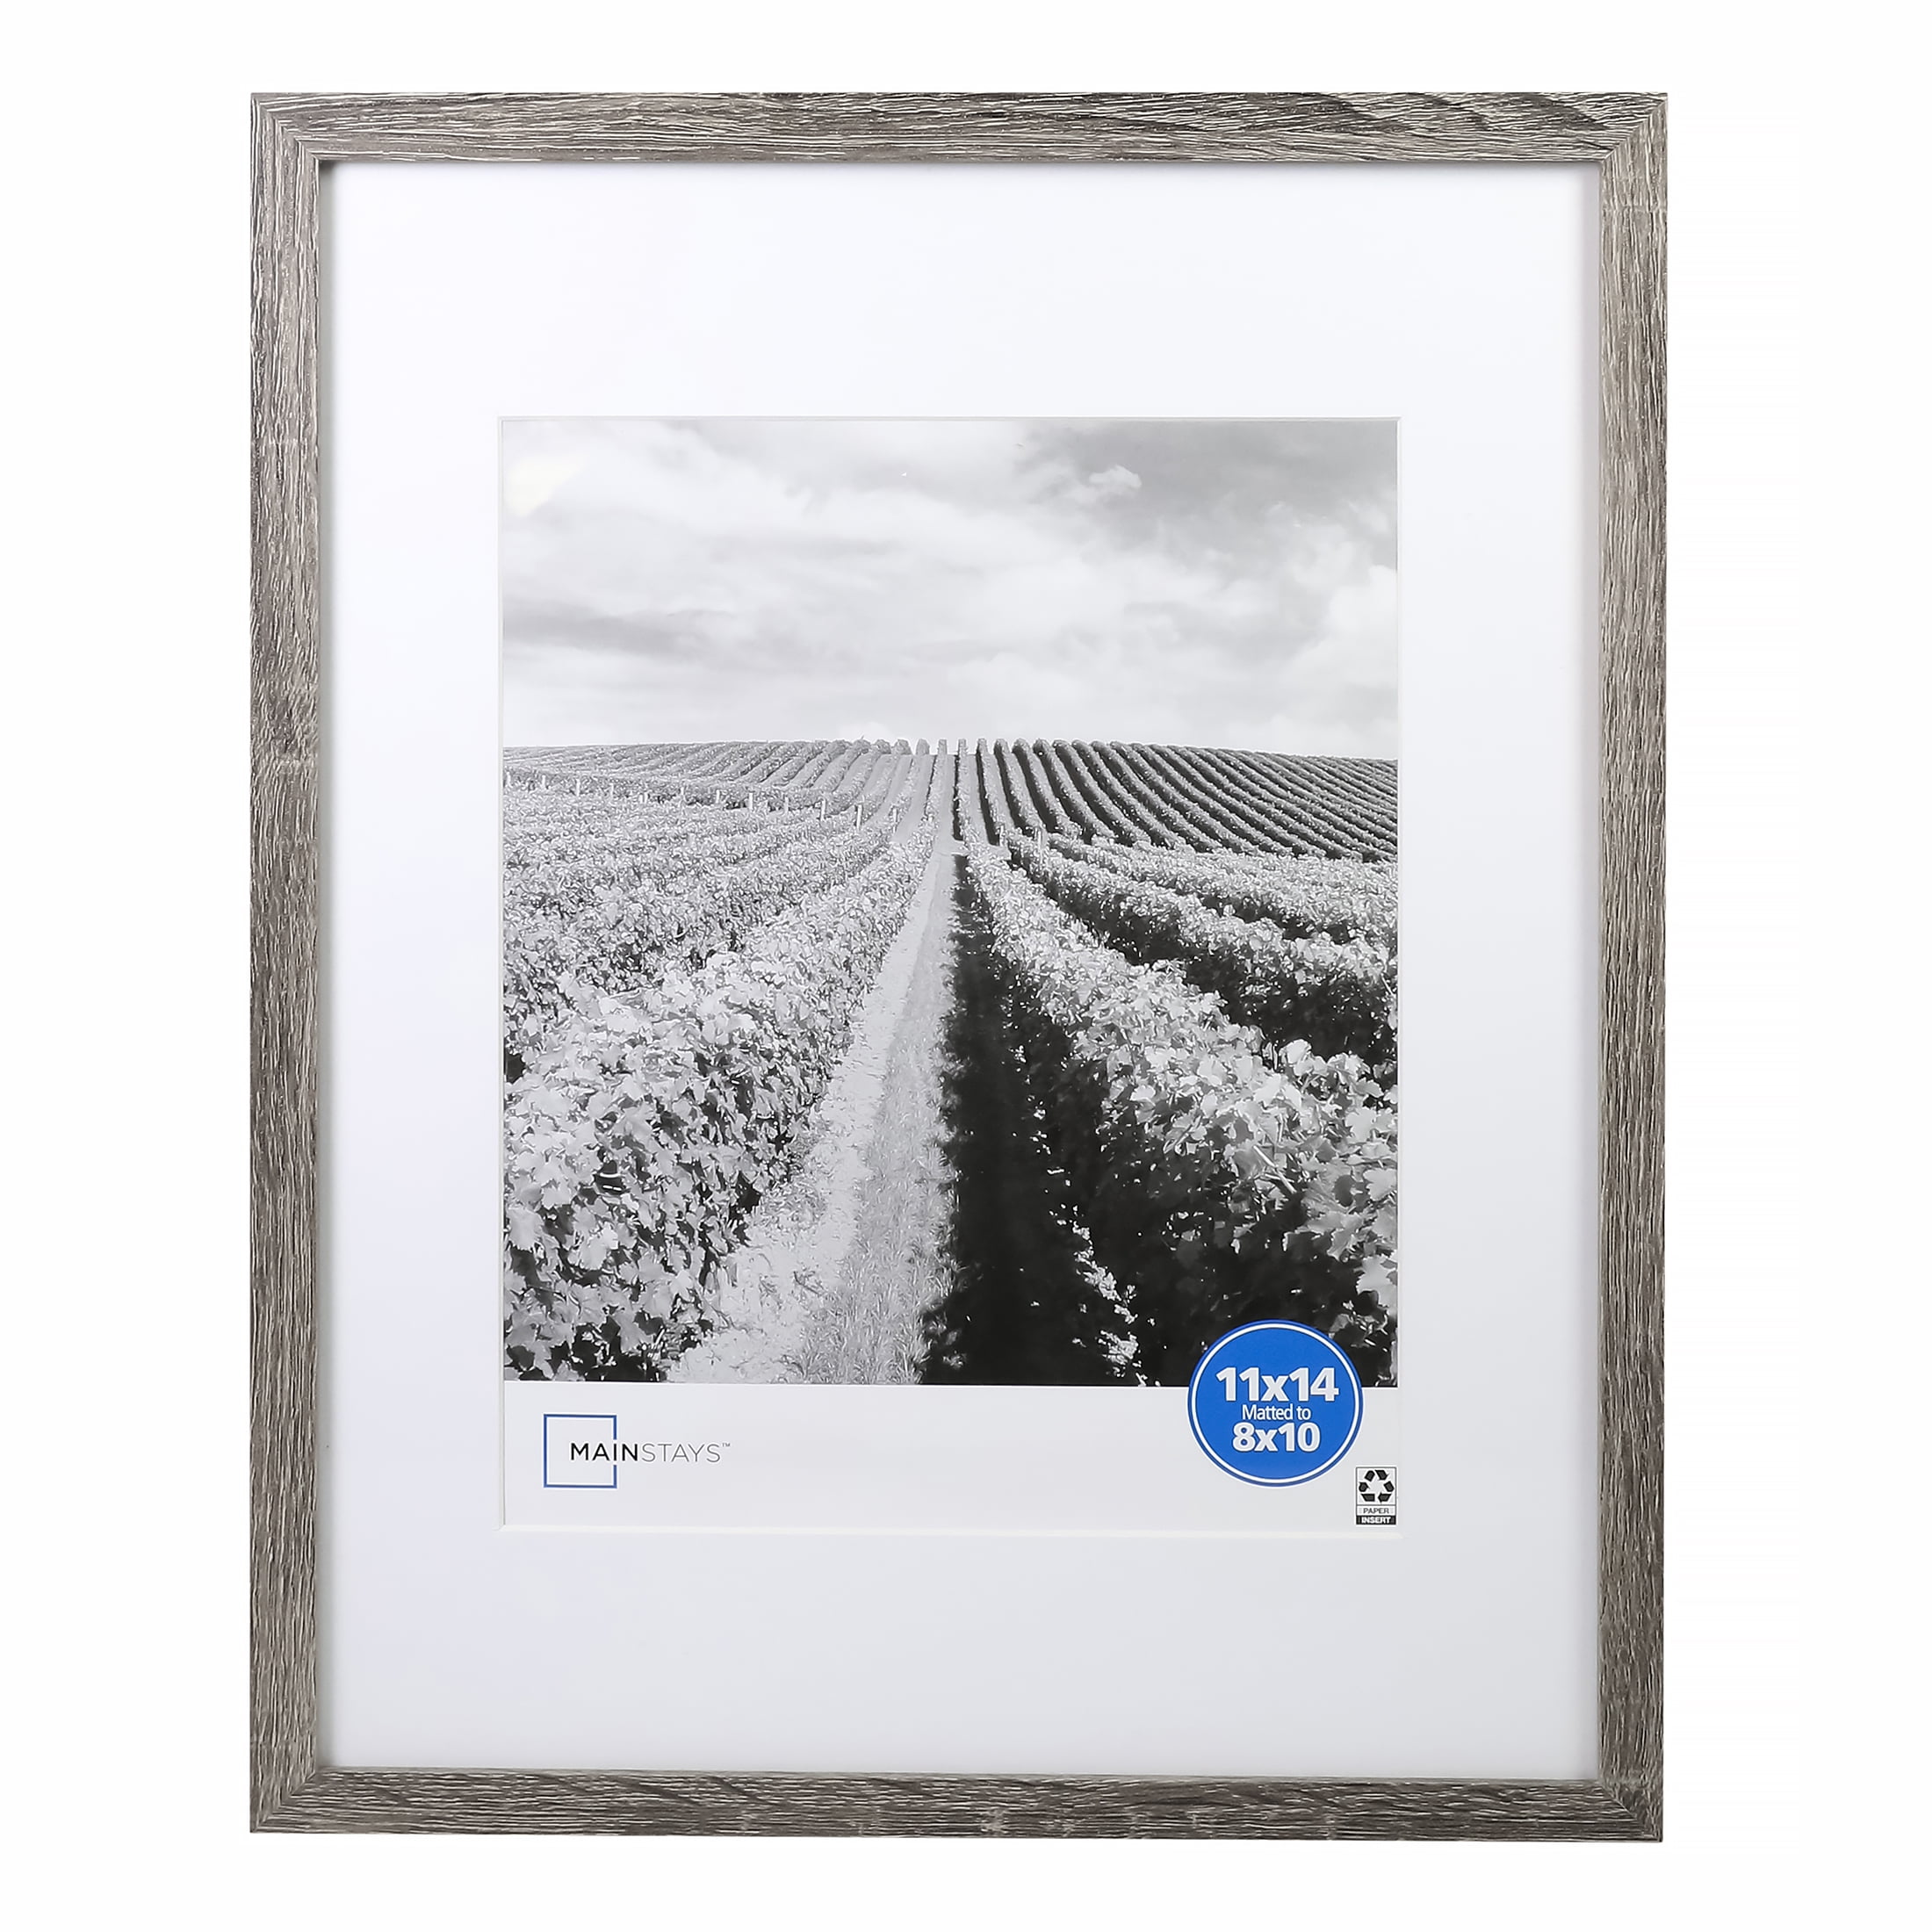 11x14 picture frame matted to 8x10 Picture, photograph or artwork